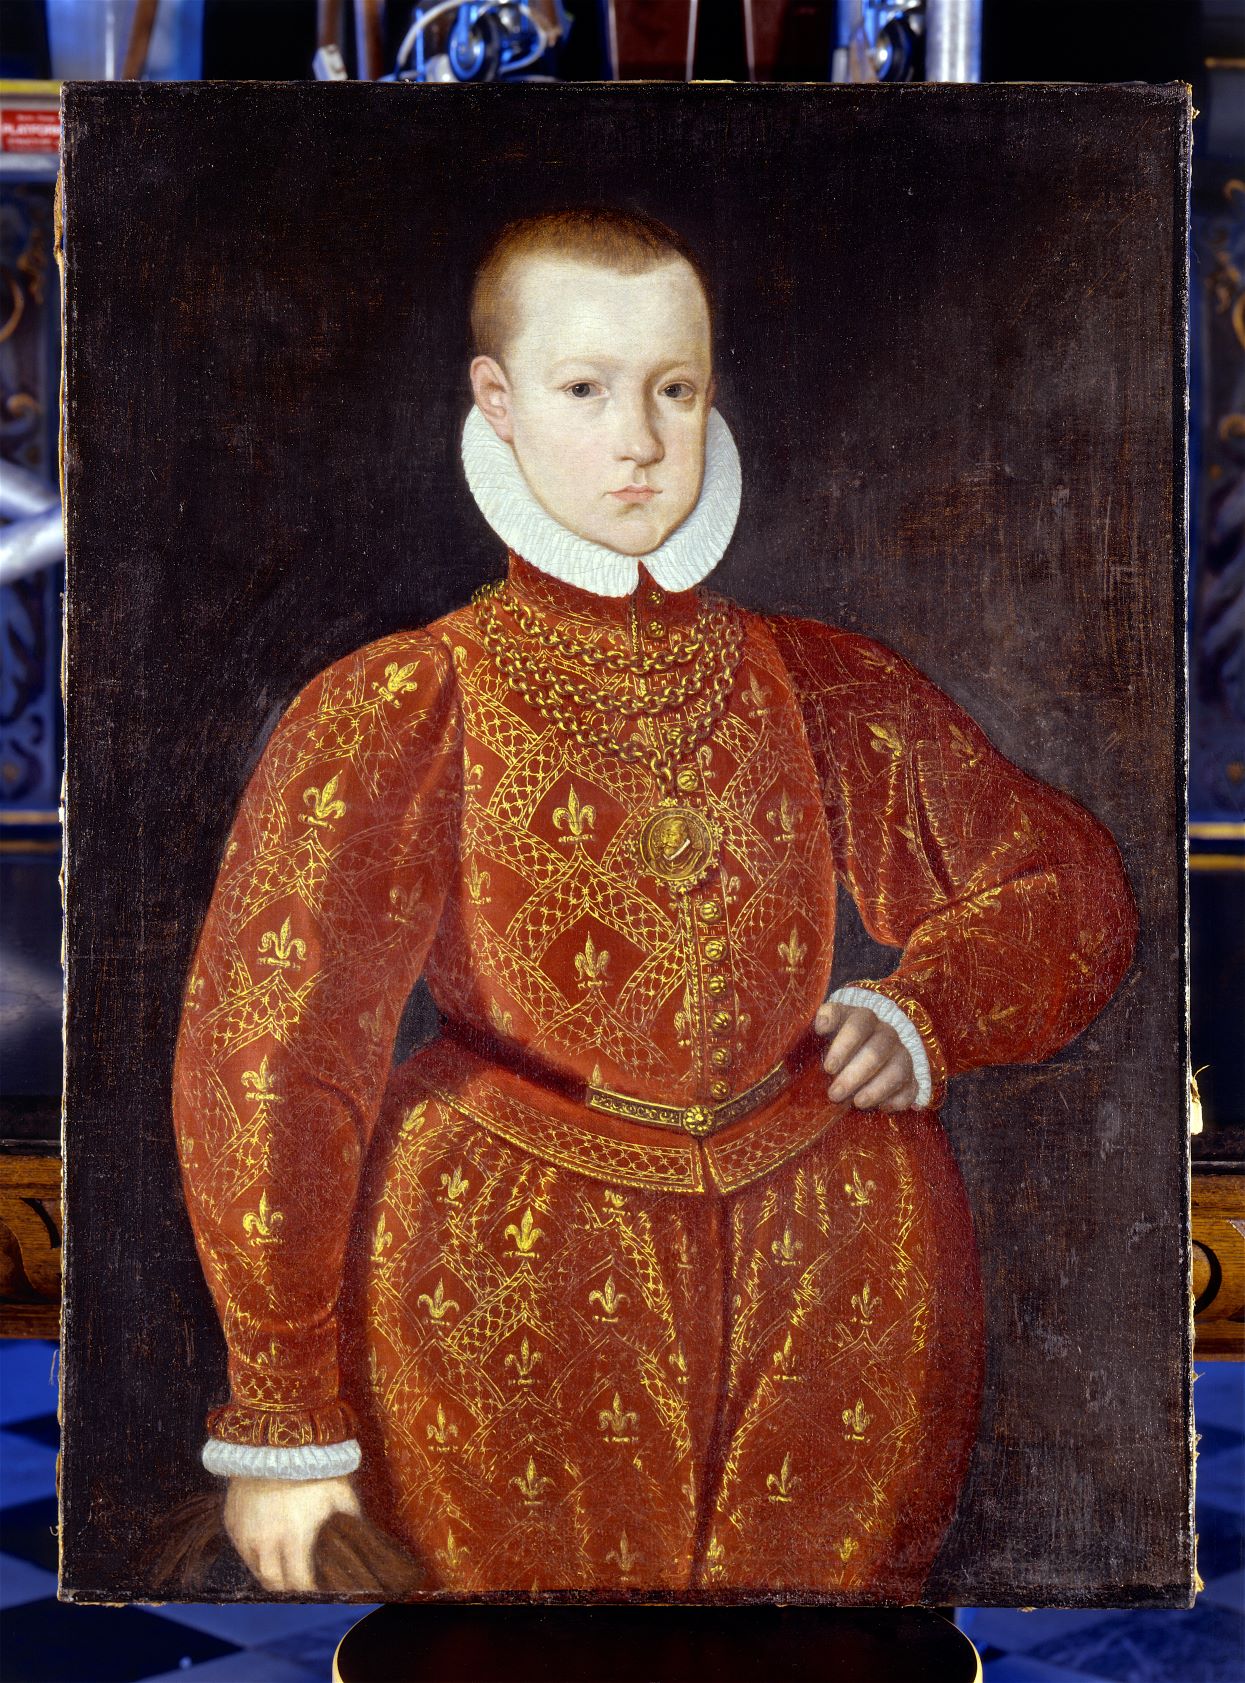 Christian IV (1577–1648) ruled over Denmark and Norway for a full 60 years. During that time, he had fortifications and towns built around the kingdom. He was not yet born when work on the construction of Varberg Fortress began. When construction entered a more intense phase in the 1580s, he was still just a little boy, about as old as in this portrait.